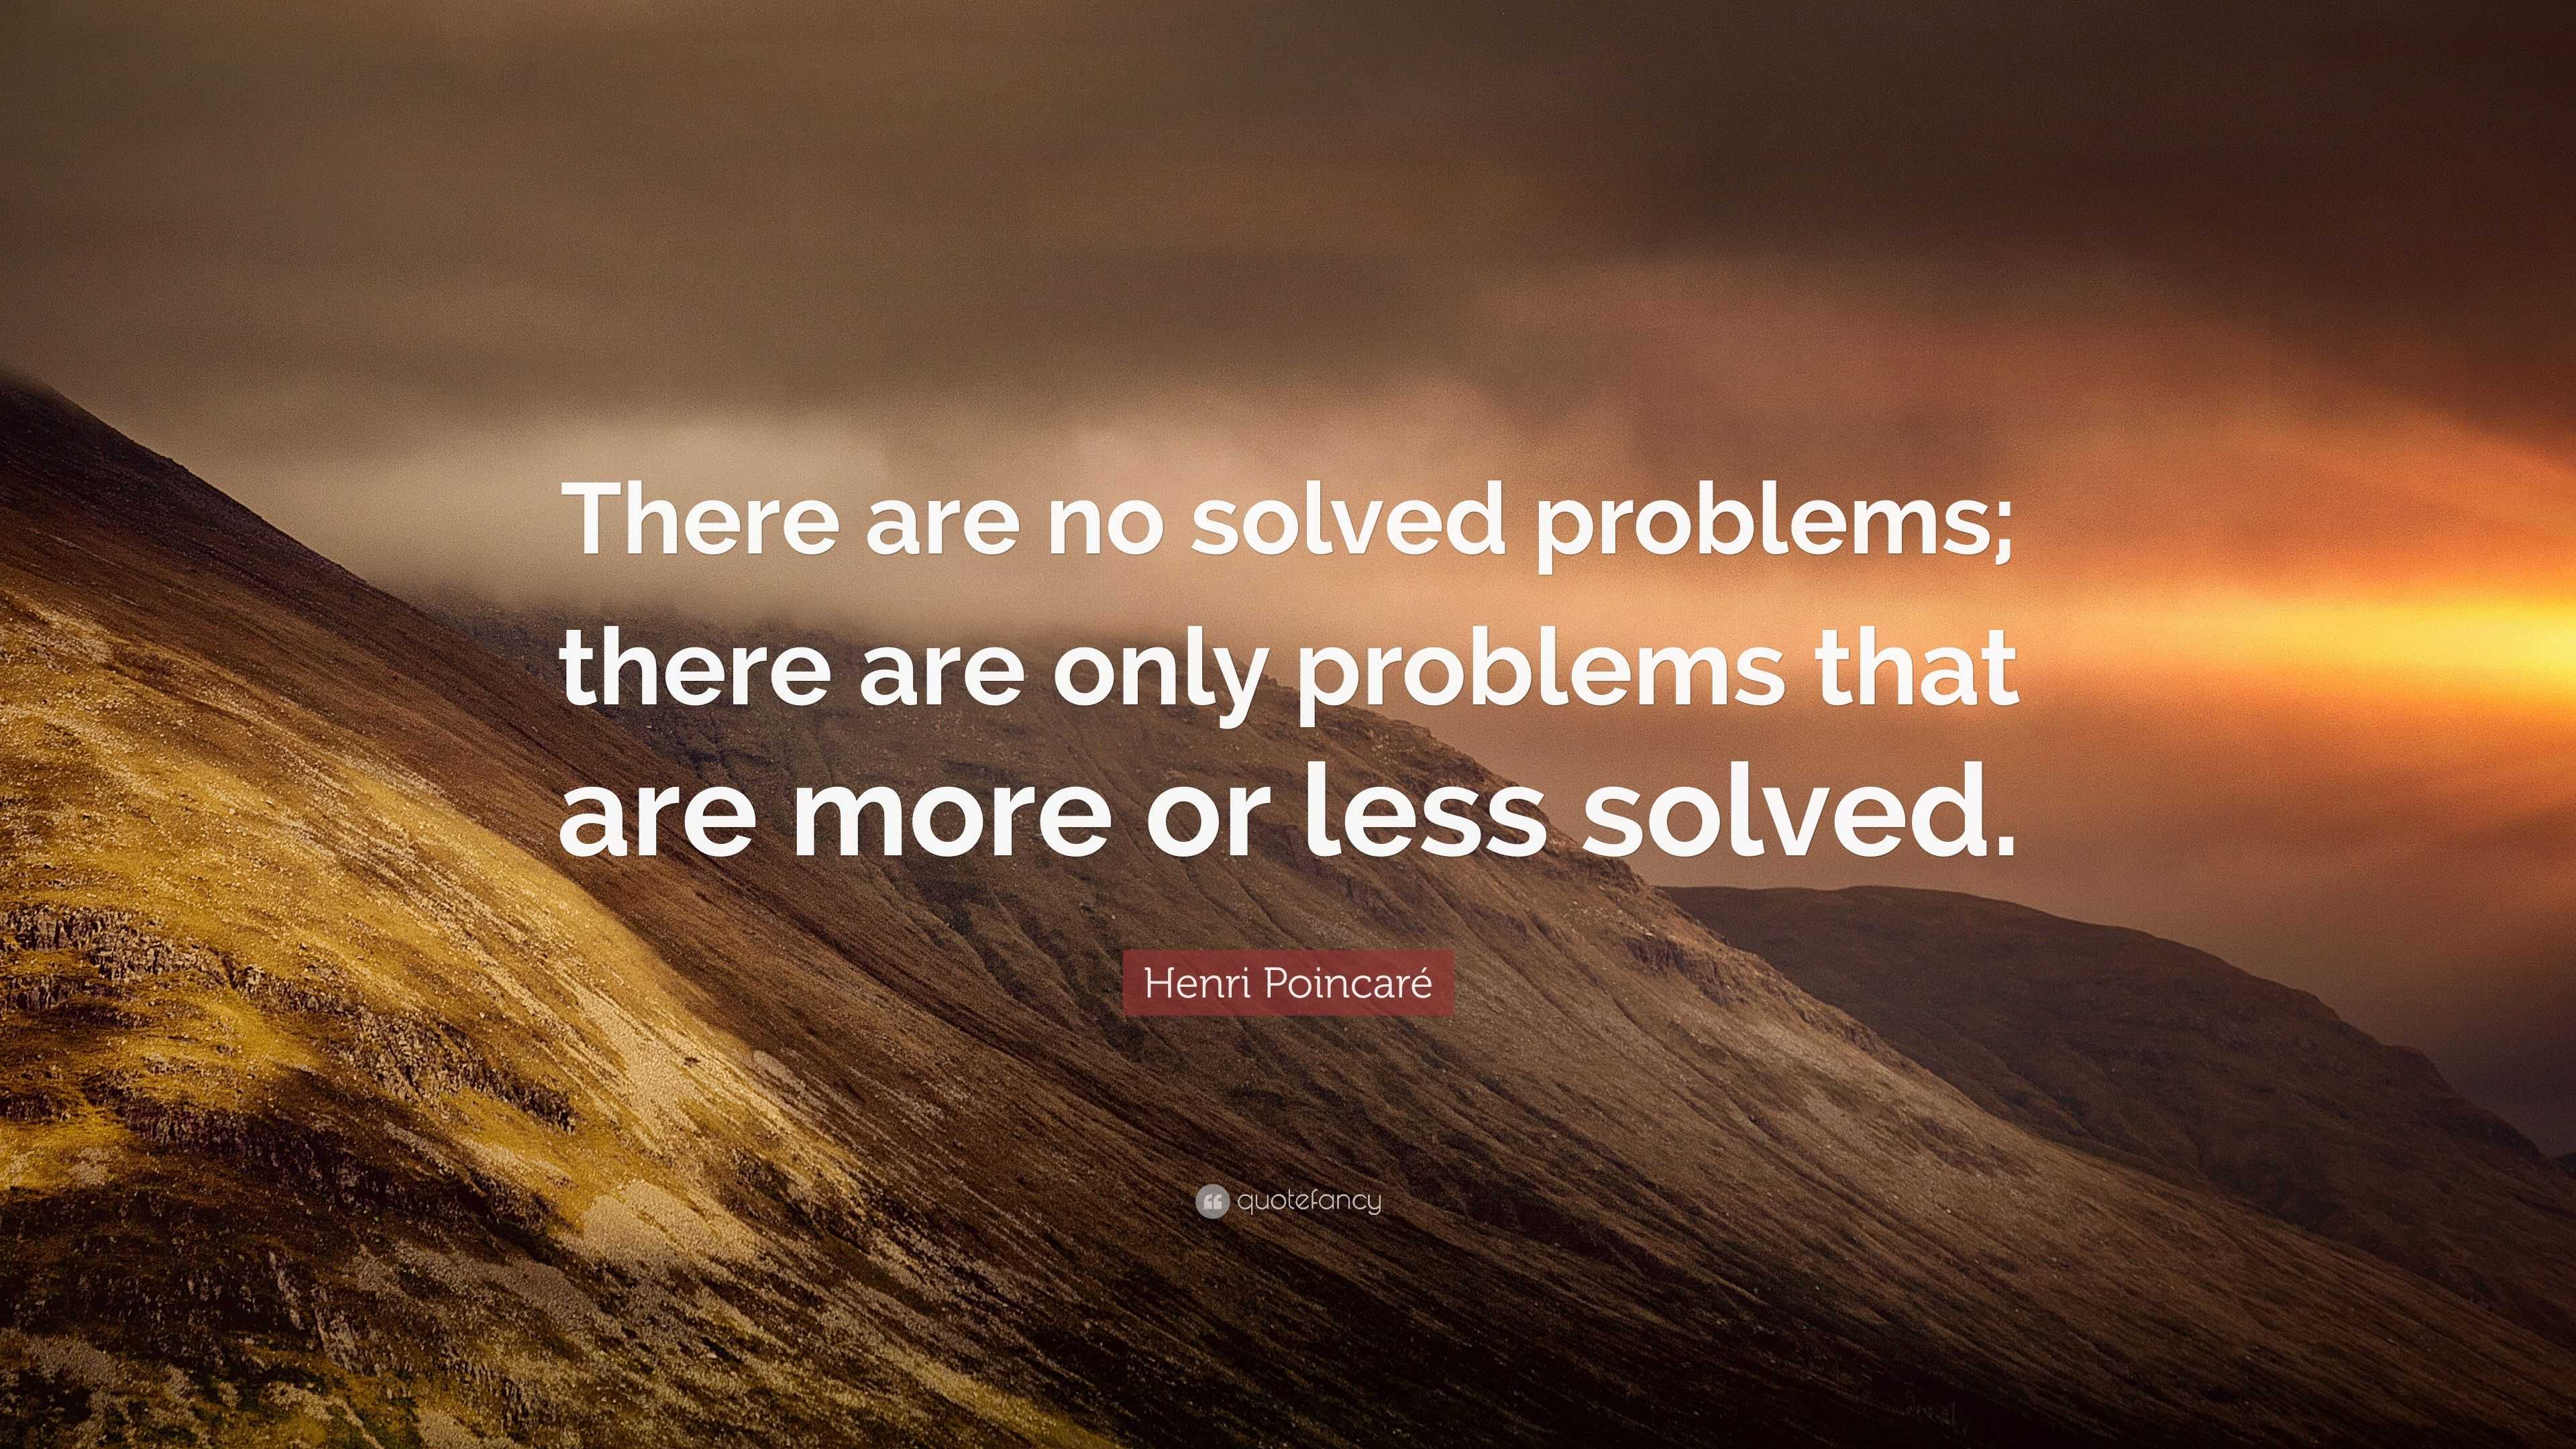 Henri Poincaré Quote: “There are no solved problems; there are only ...